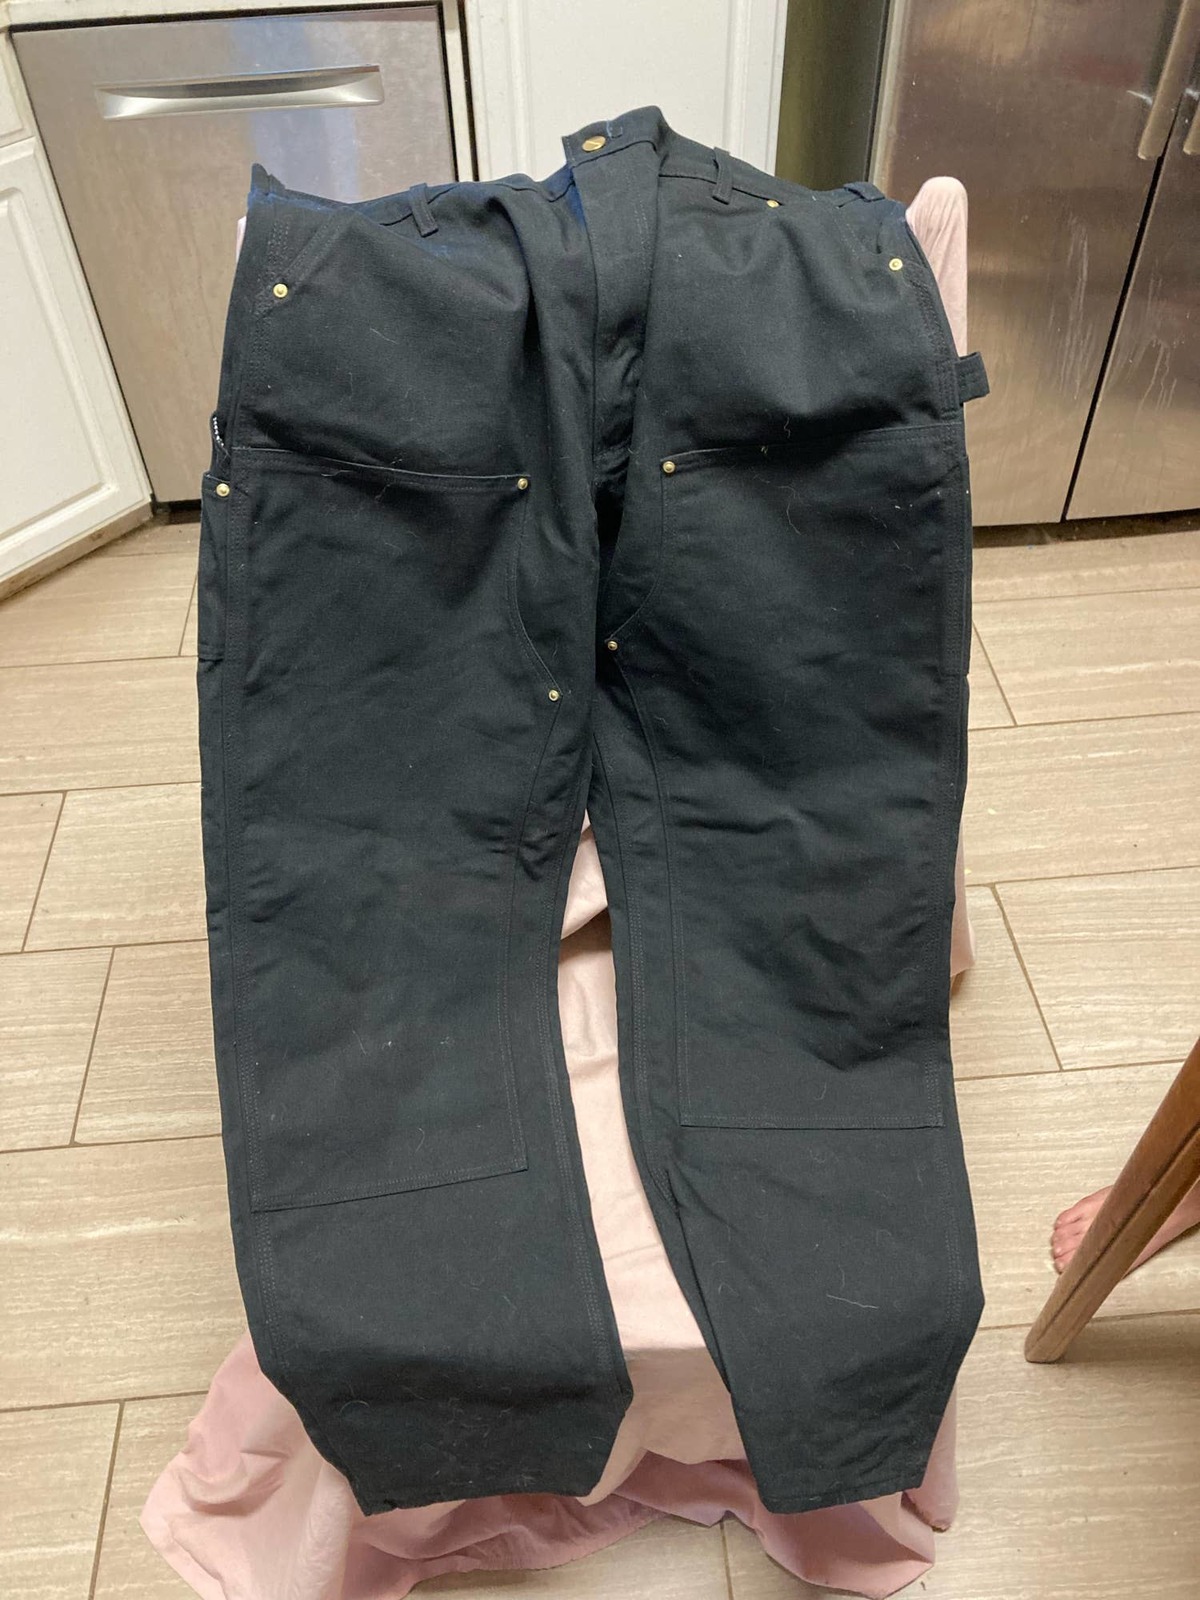 Primary image for 2019 Black Carhartt Pants Size 40x34